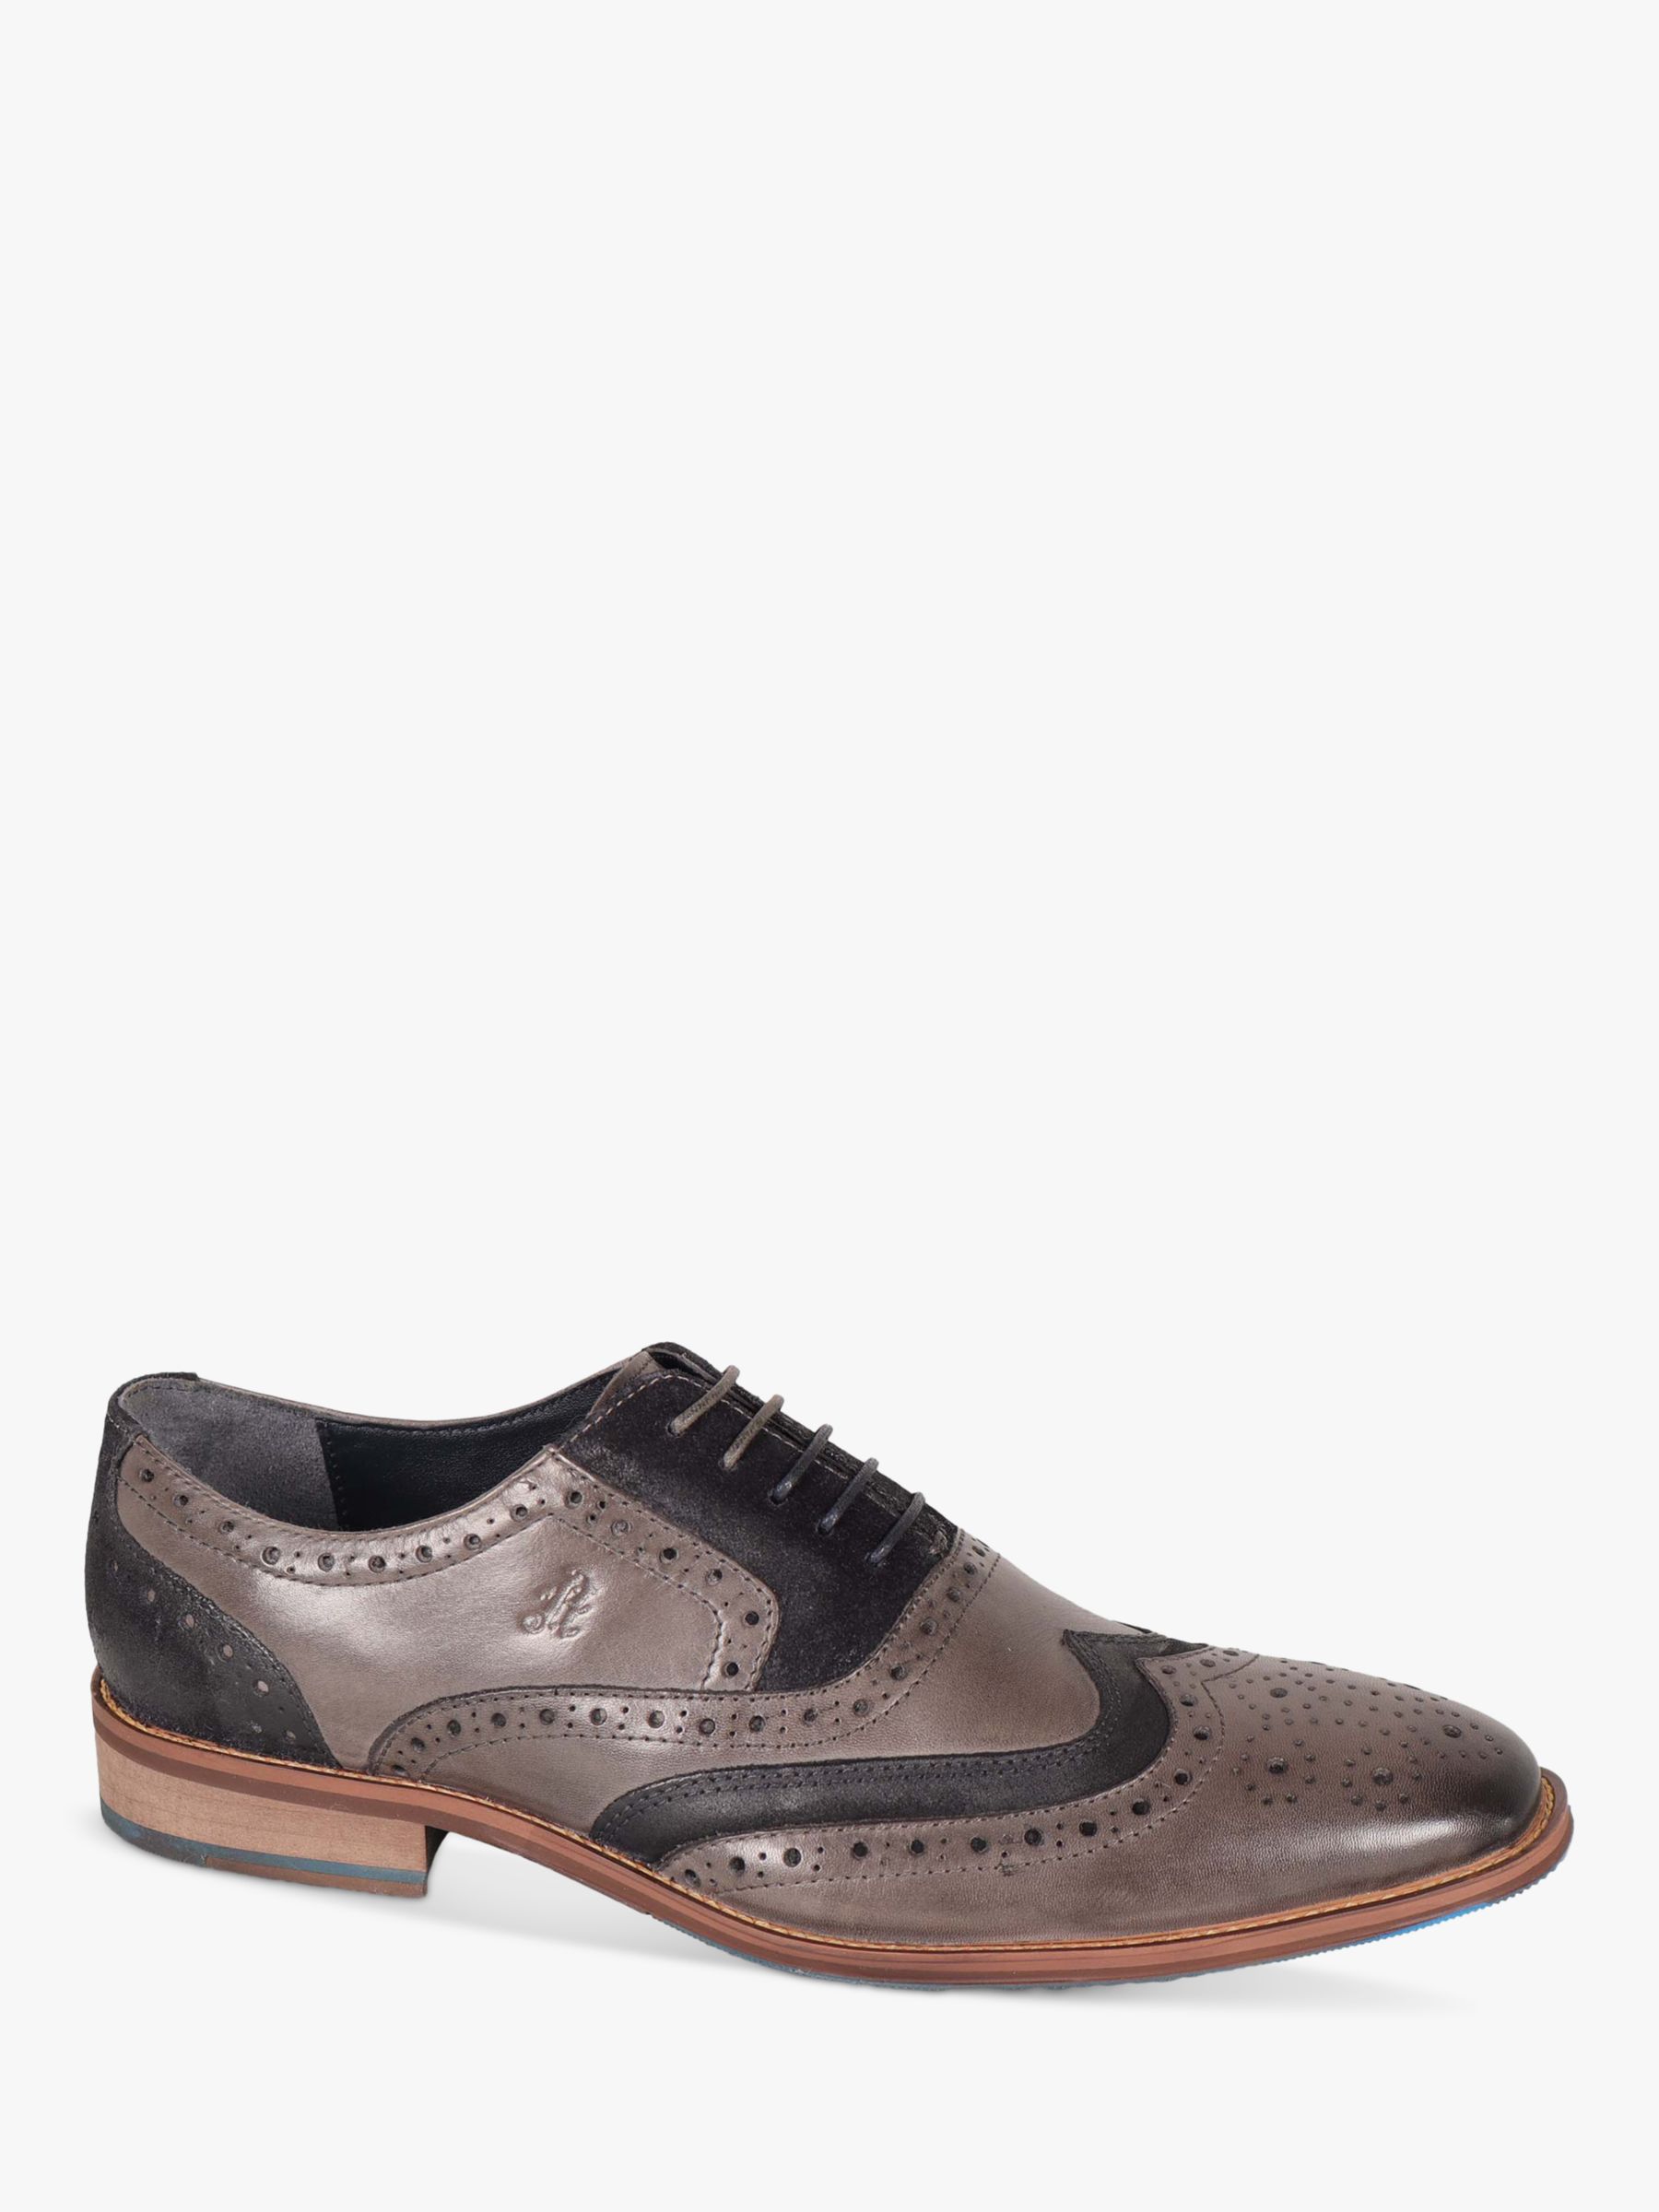 Silver Street London Amen Collection Galway Leather Brogues, Grey/Black ...